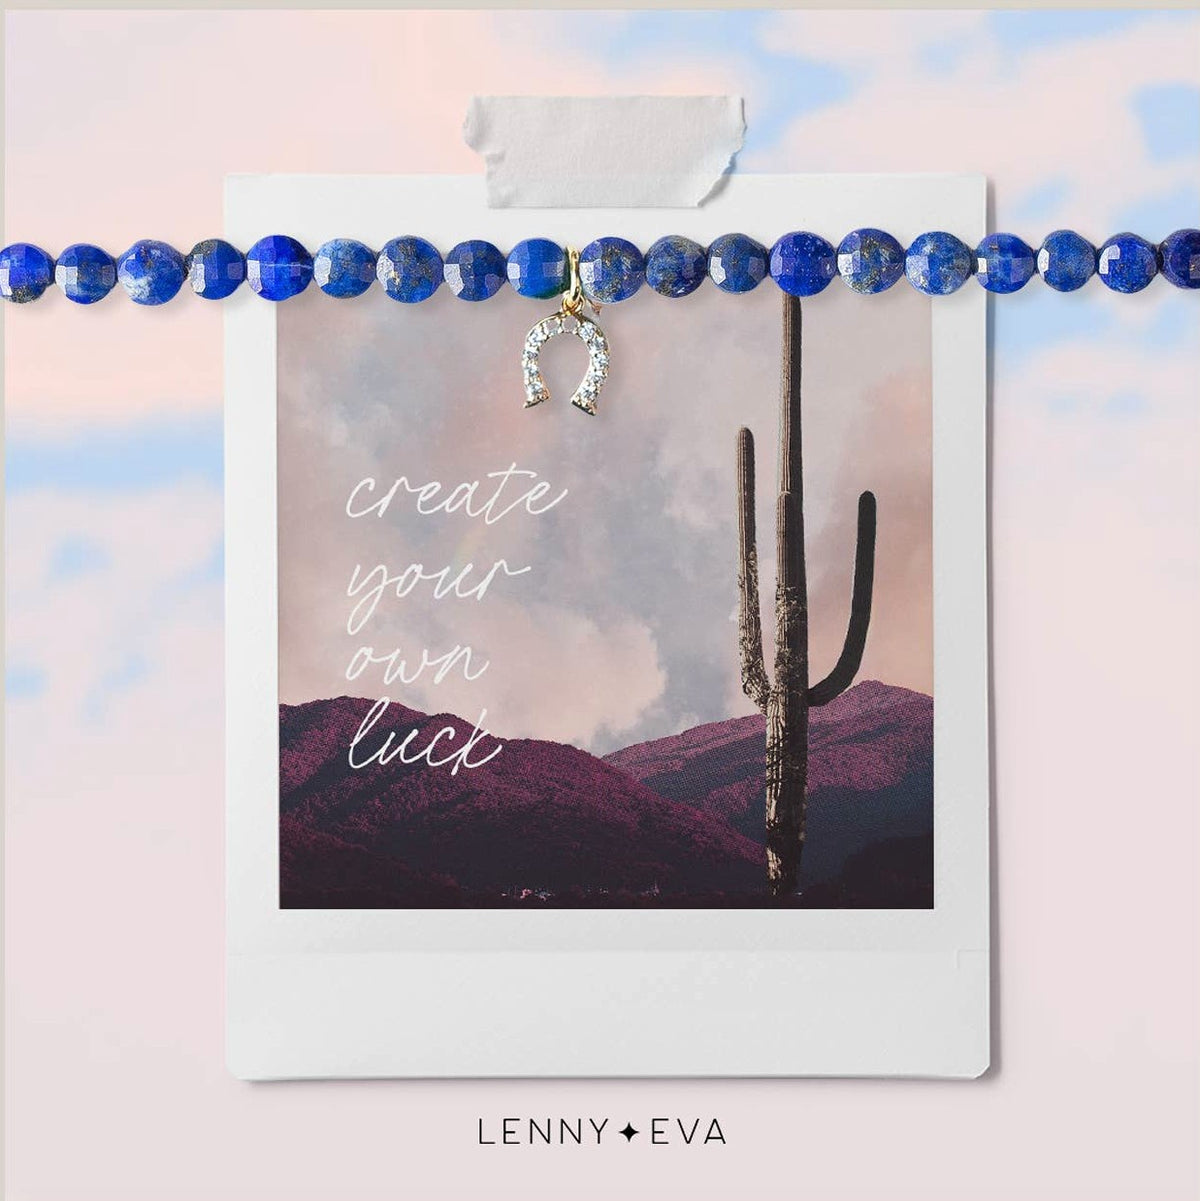 Blue lapis lazuli beaded bracelet with a tiny cubic zirconia horseshoe charm. Packaged on a card with a desert background and the text "create your own luck"